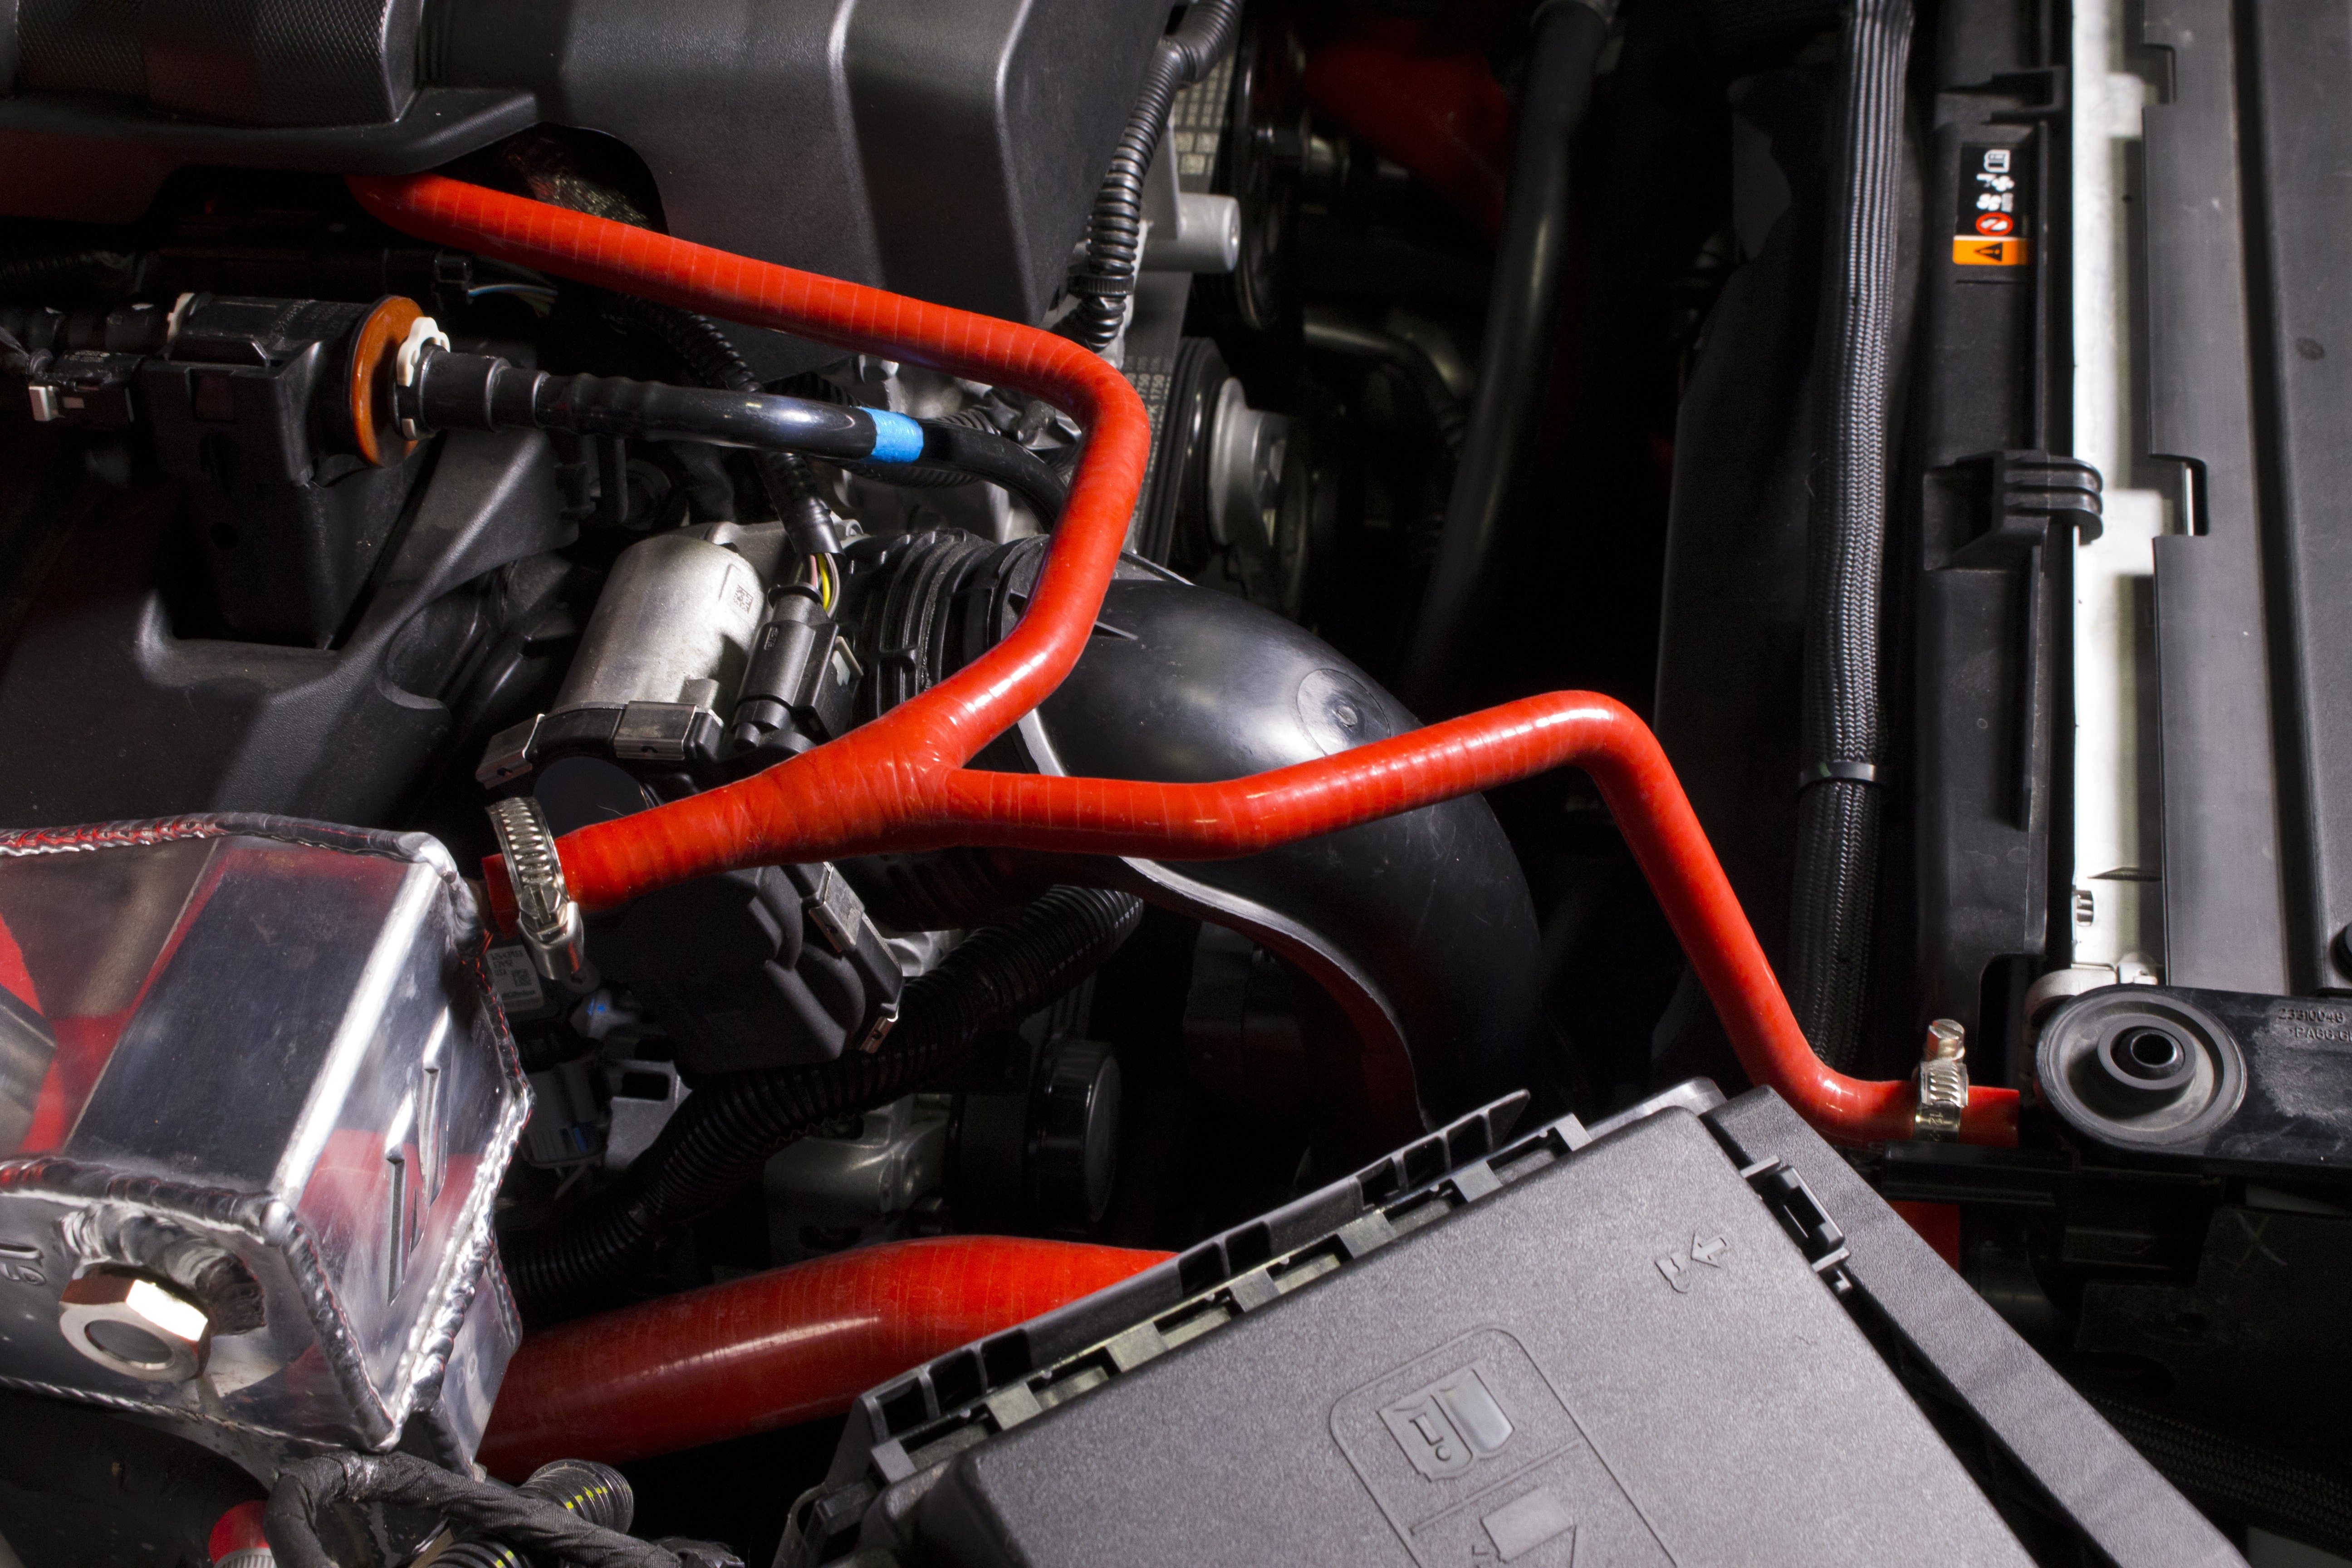 All About Options - Silicone Radiator Hose Kit, Pictures and Pre-sale!